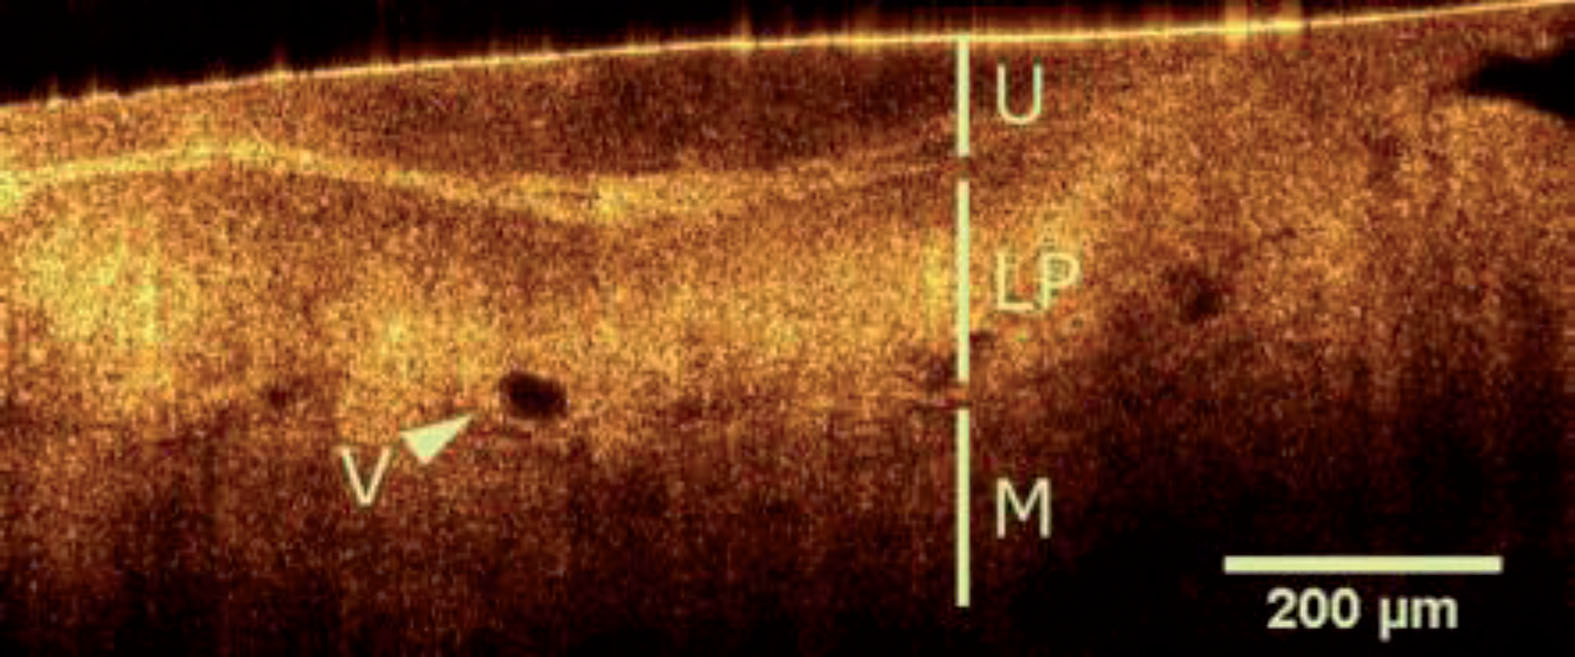 OCT image of a healthy bladder wall indicating urothelium (U), intact lamina propria (LP) and muscularis (M) [56]. (Used under the terms of the Creative Commons Attribution 4.0 license)